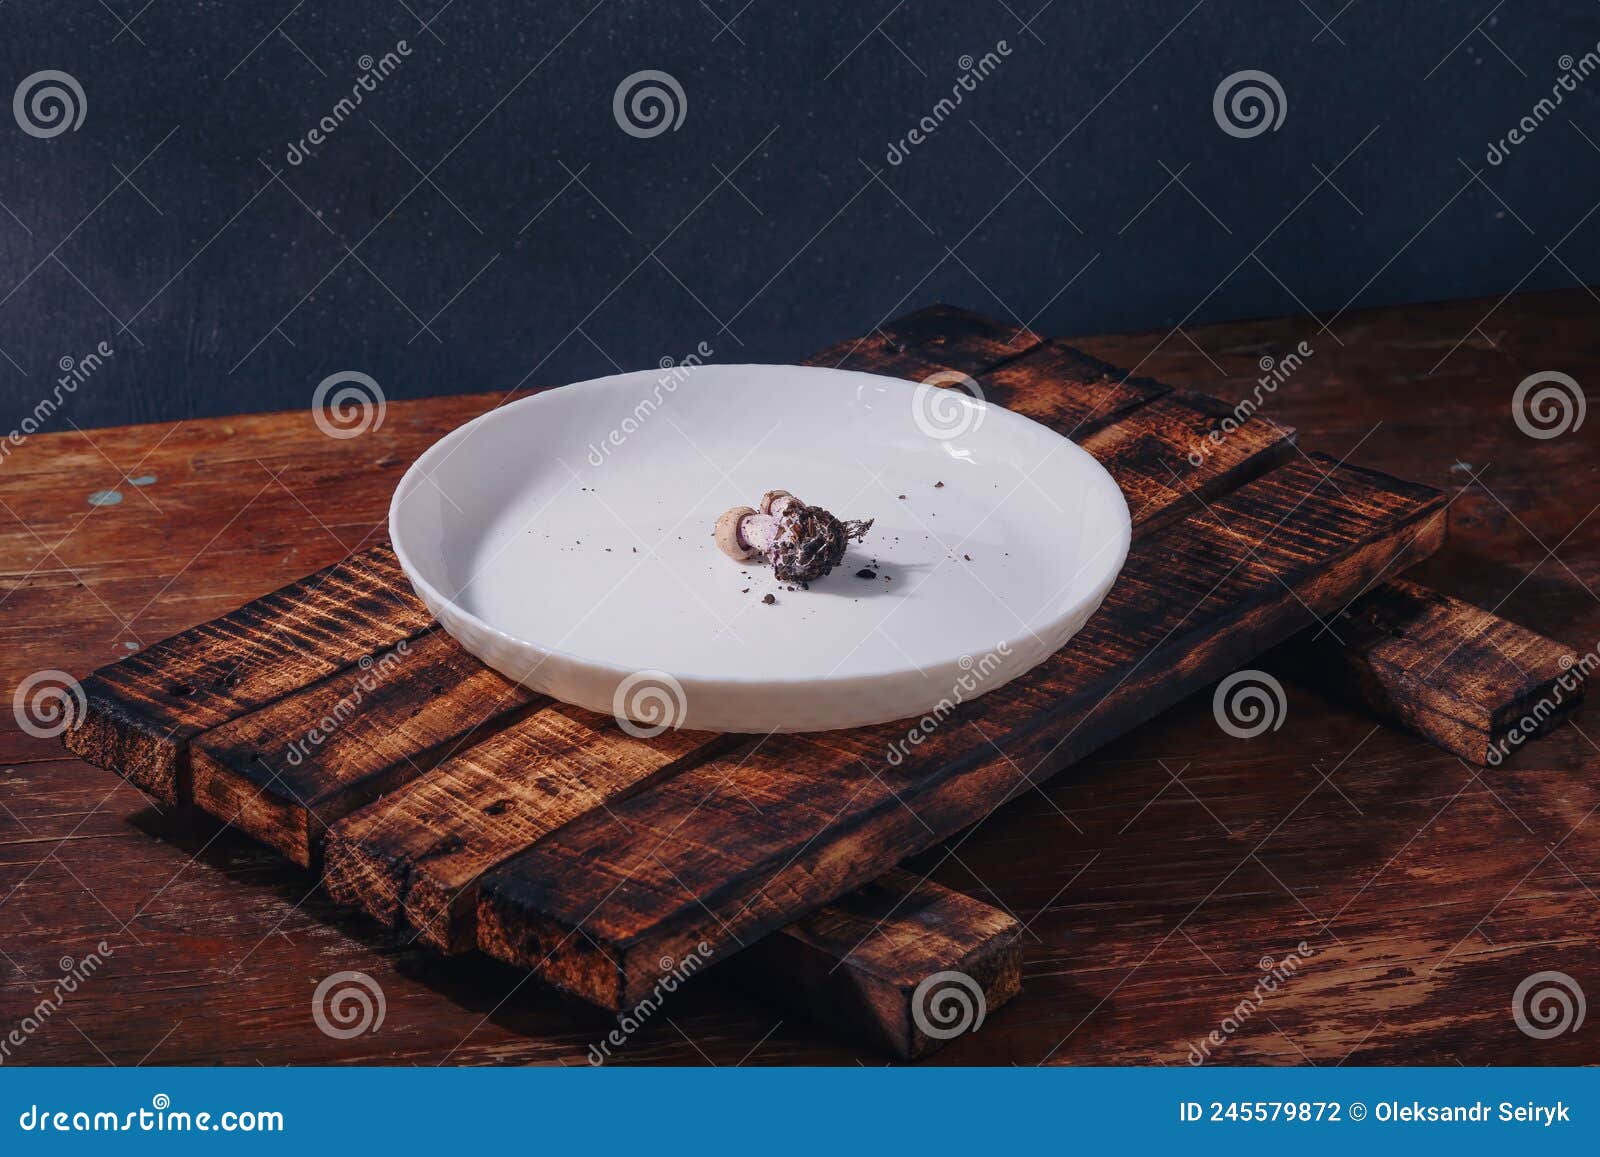 tiny mushroom with soil right on plate. humanity using earth resouces. mass consumption, lack of food, harmful effect on